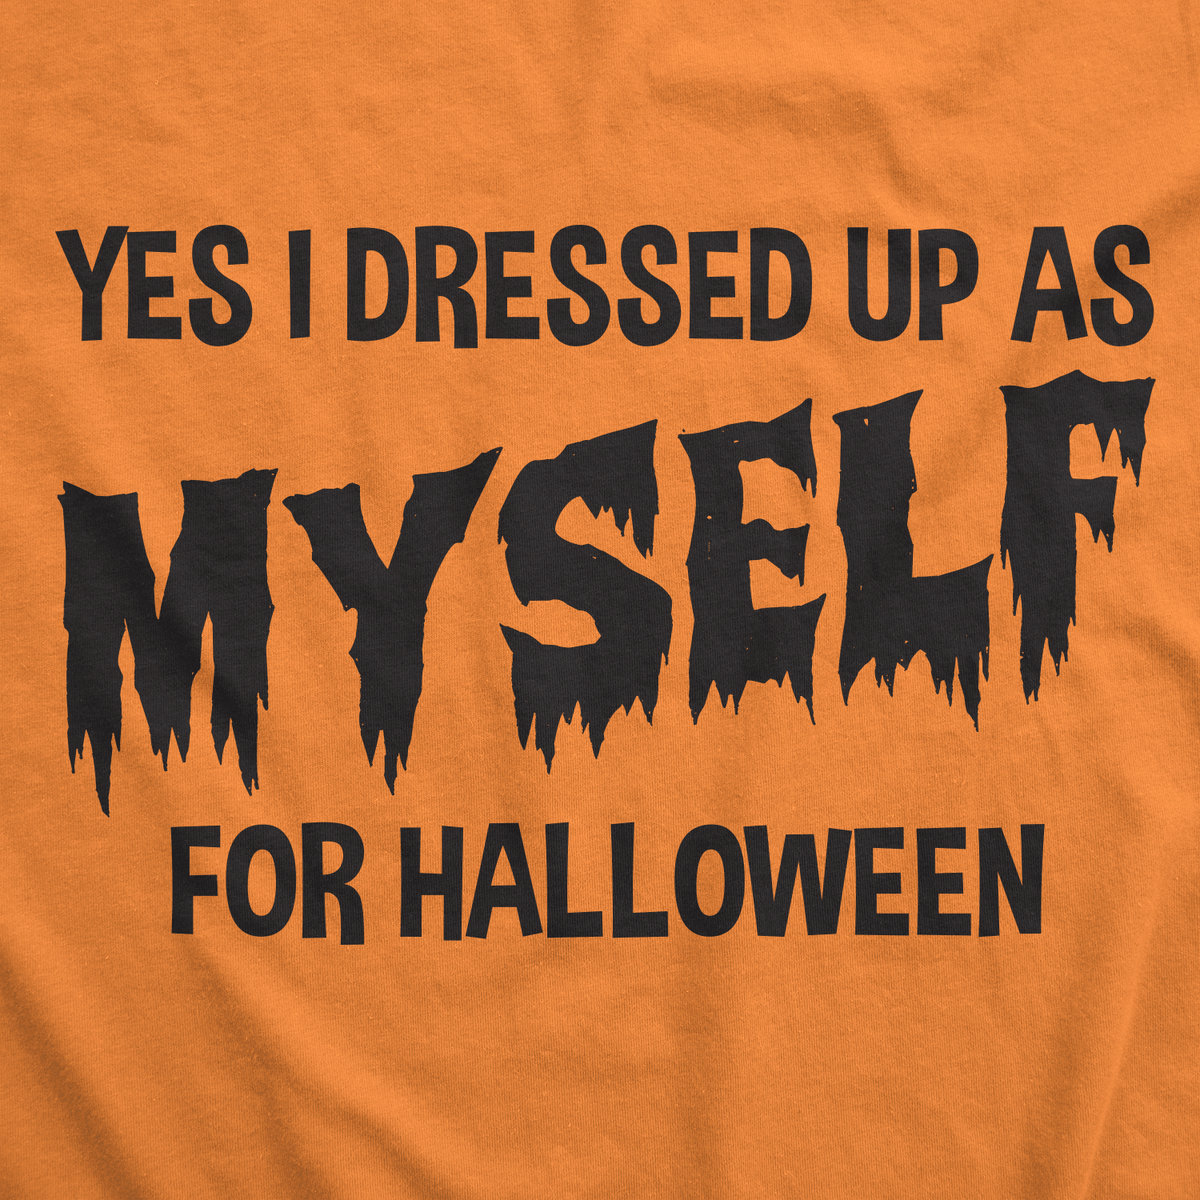 I Dressed Up As Myself For Halloween Men&#39;s Tshirt - Crazy Dog T-Shirts